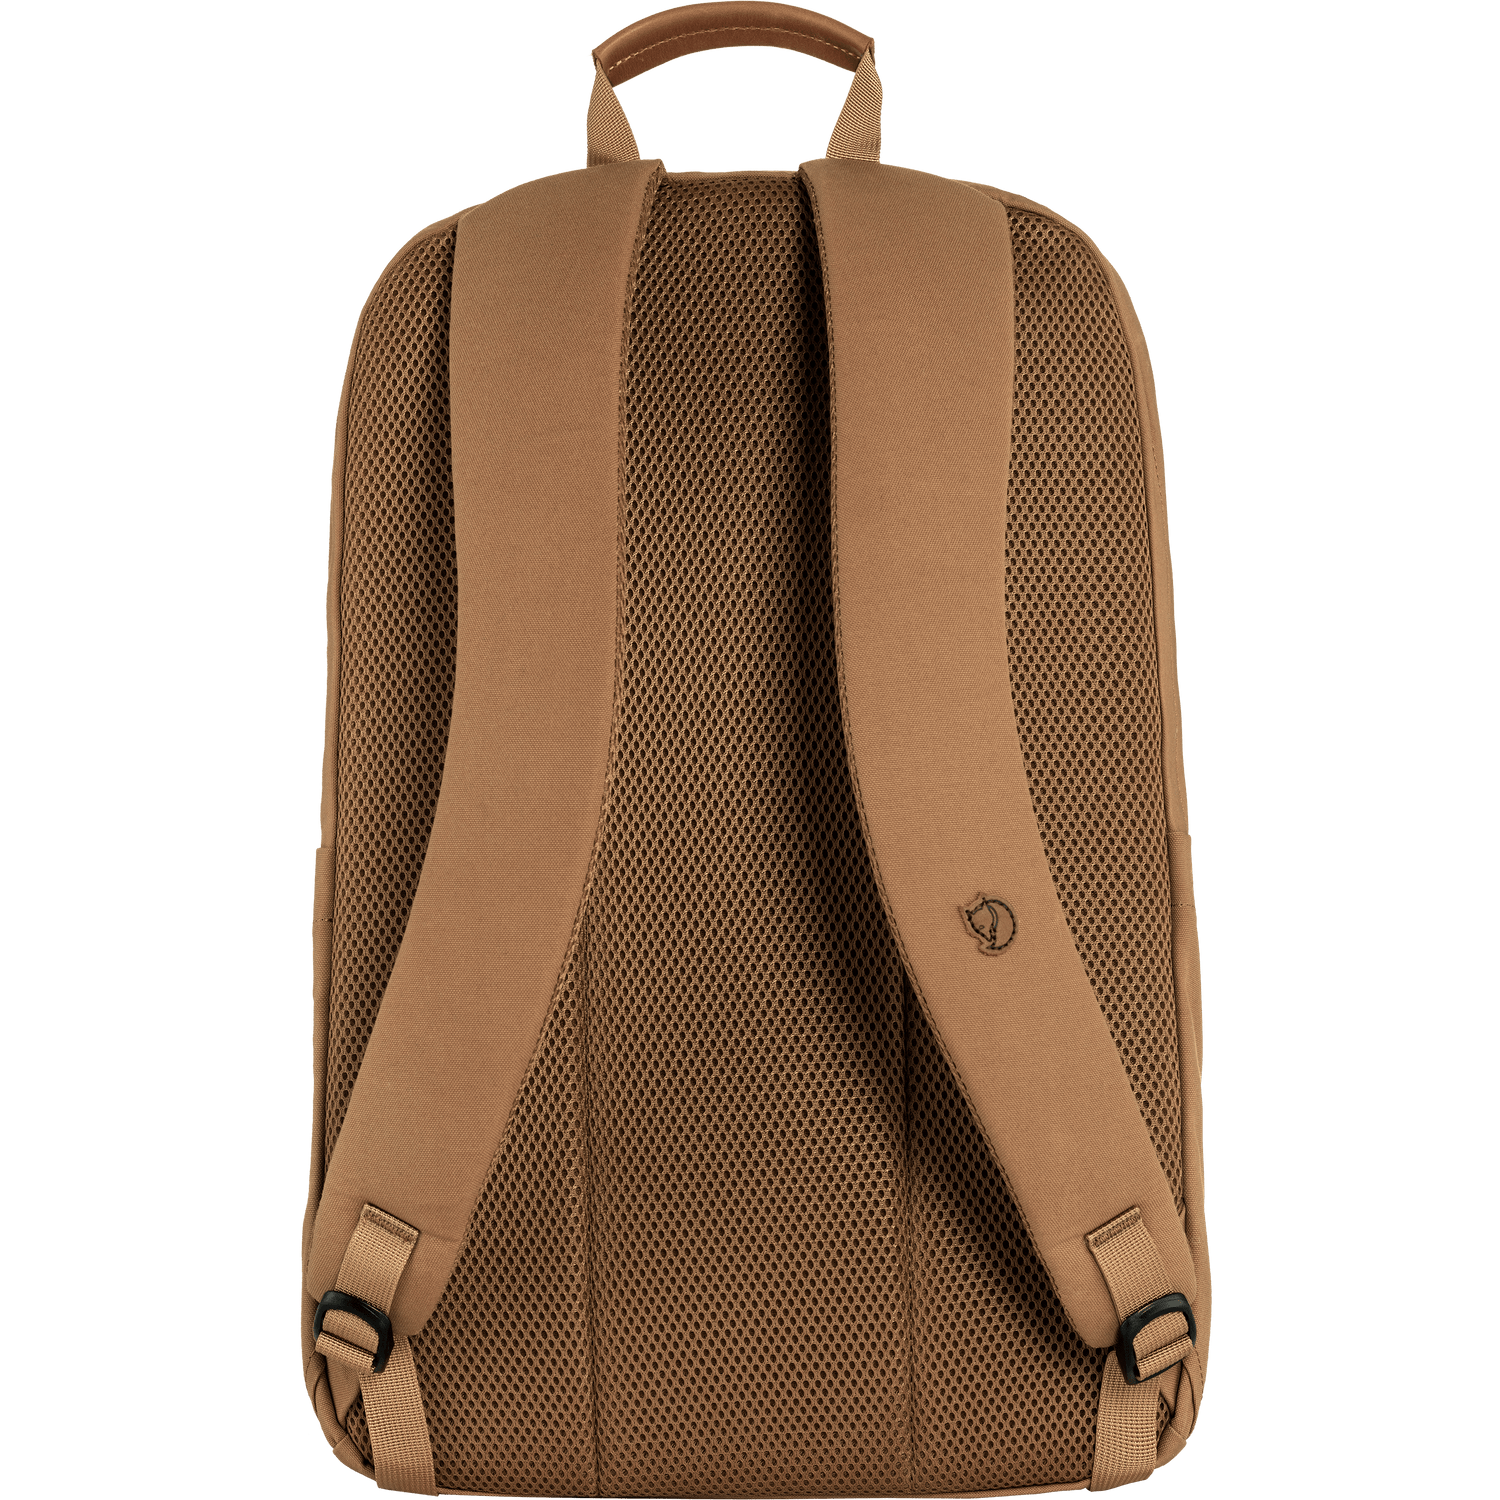 Fjällräven Räven 28l backpack - Recycled Polyester & Organic Cotton Khaki Dust Bags